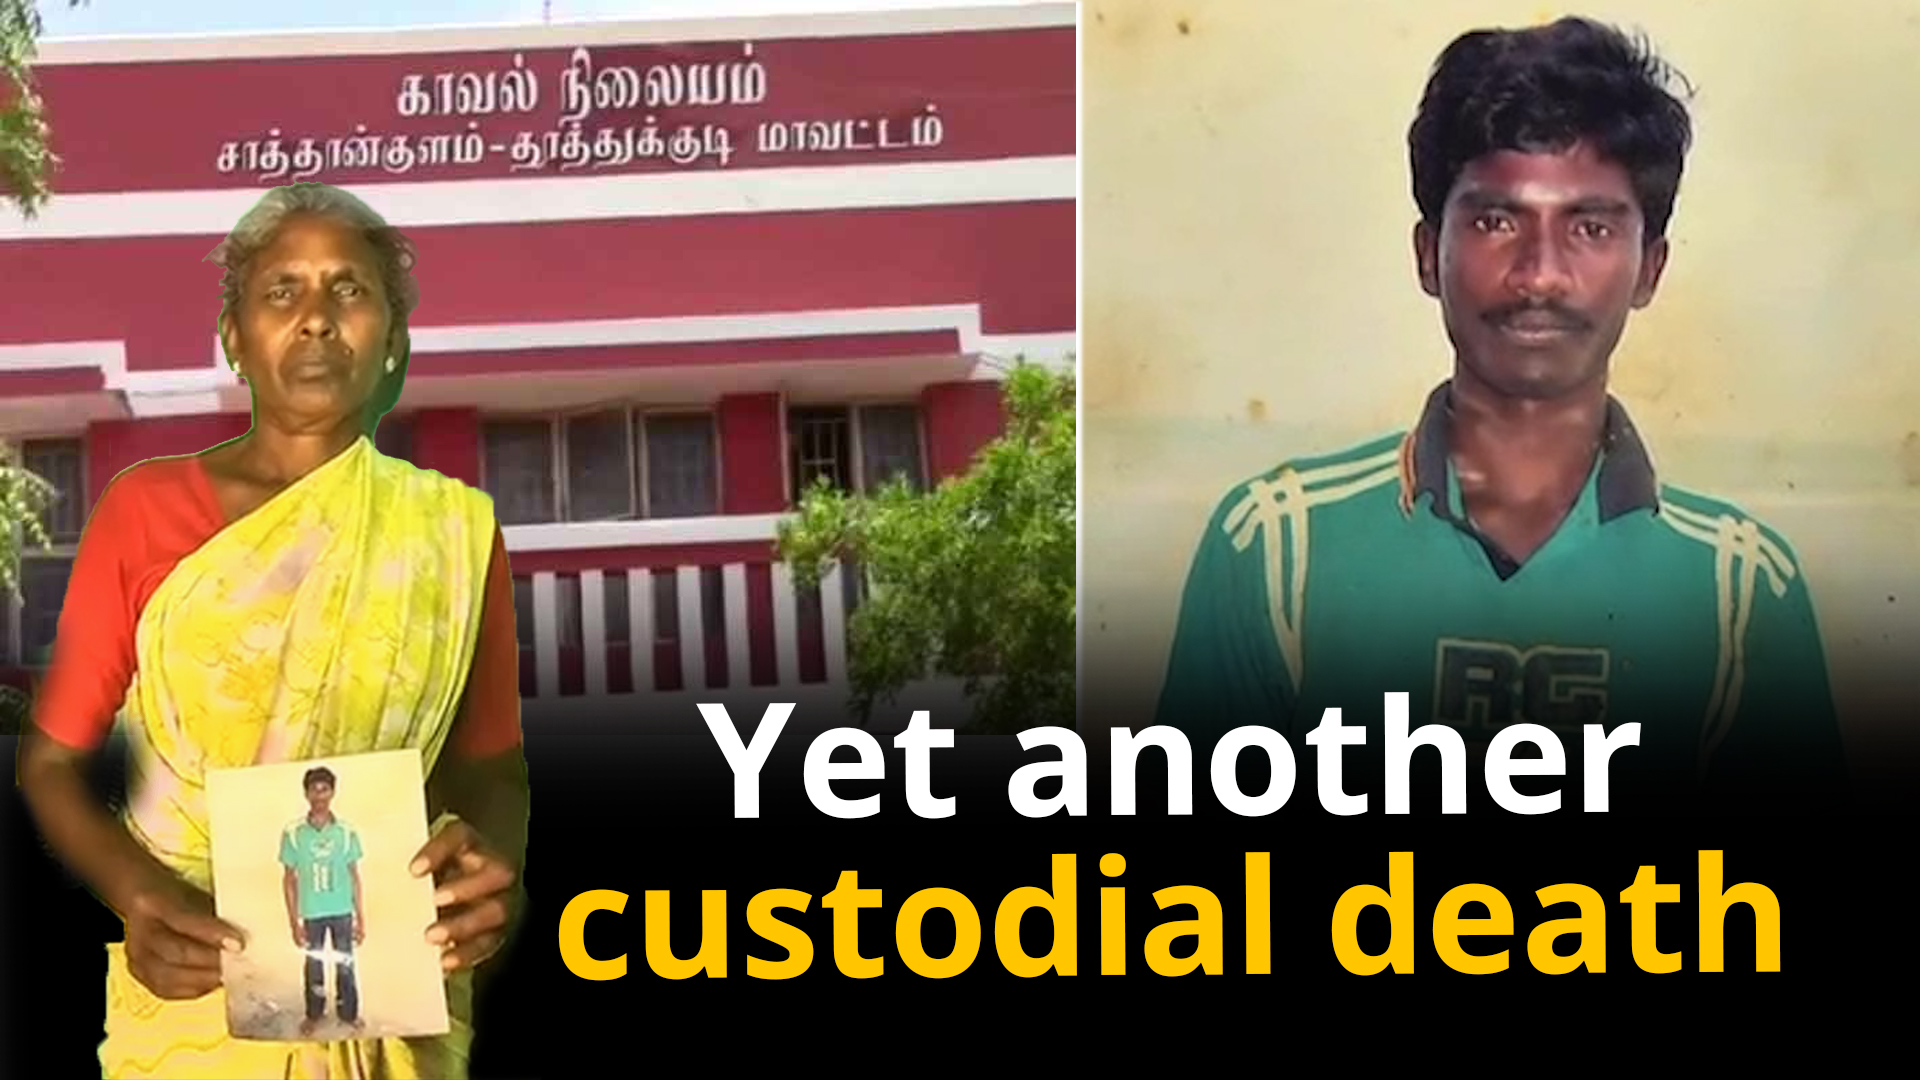 Sathankulam police shocker: Another case of custodial death comes to light